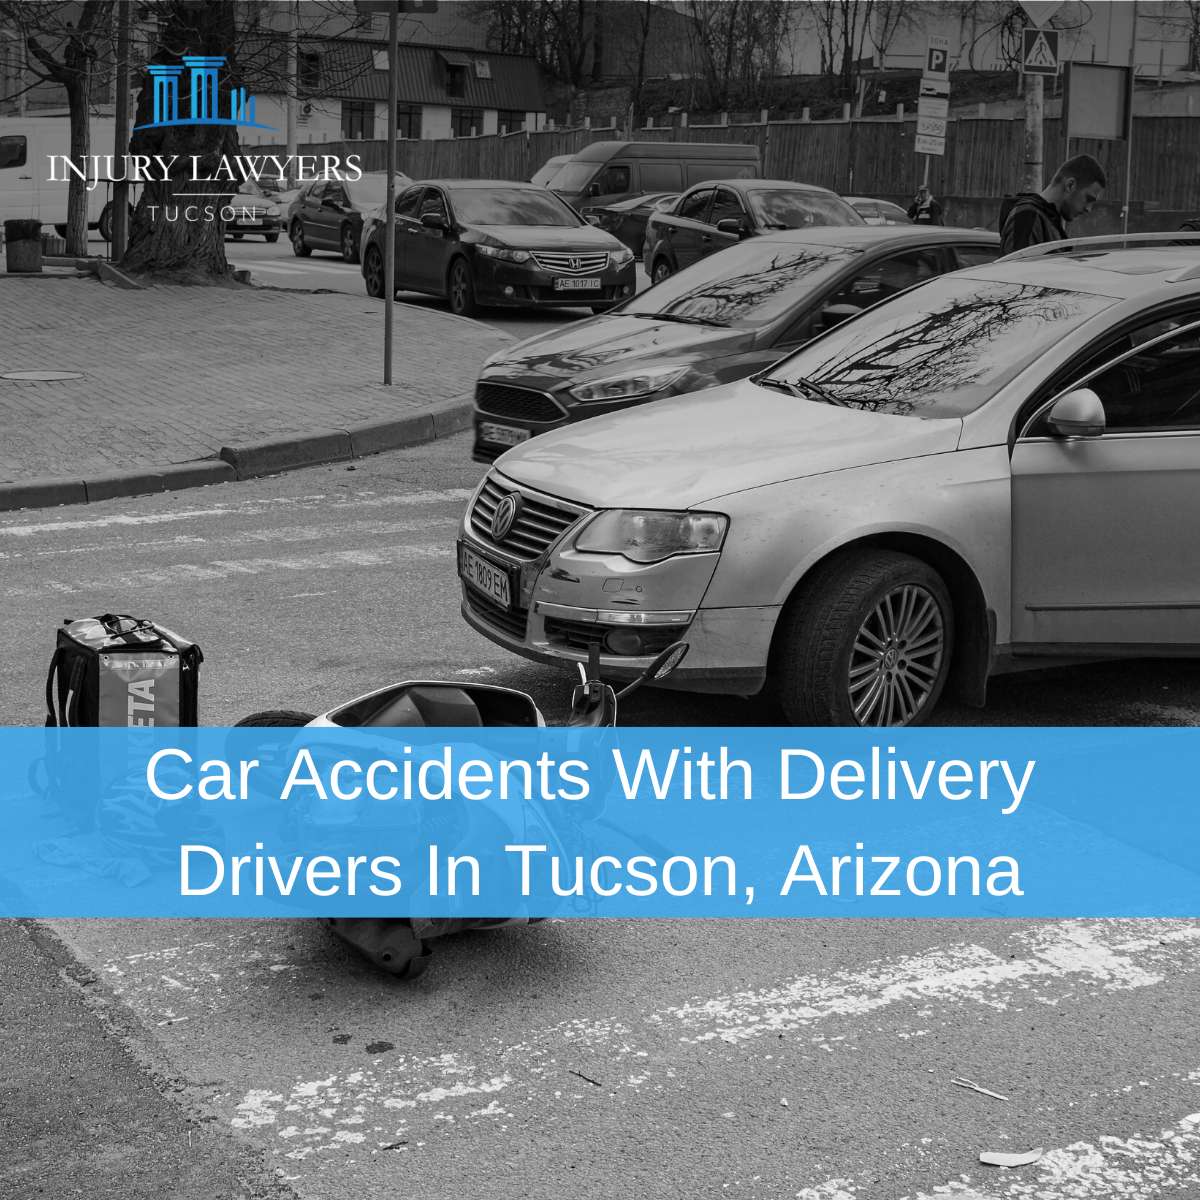 Car Accidents With Delivery Drivers In Tucson, Arizona